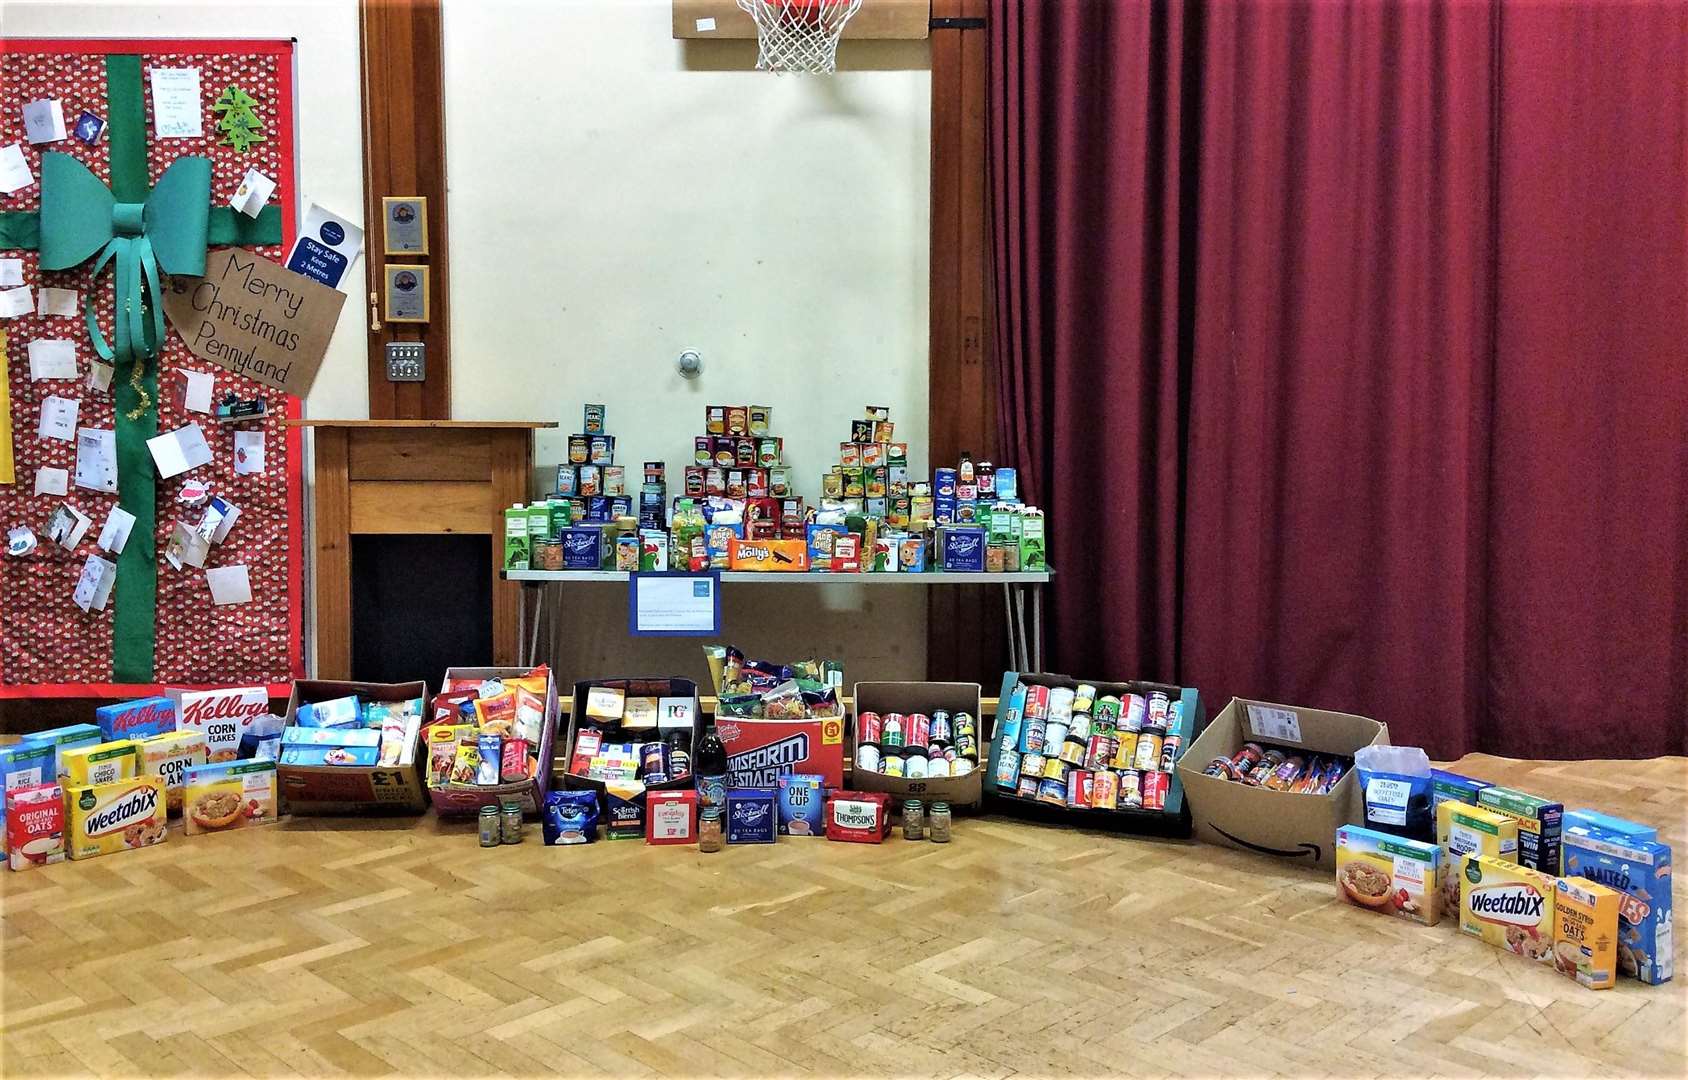 There were 17 boxes delivered in total to the foodbank yesterday.